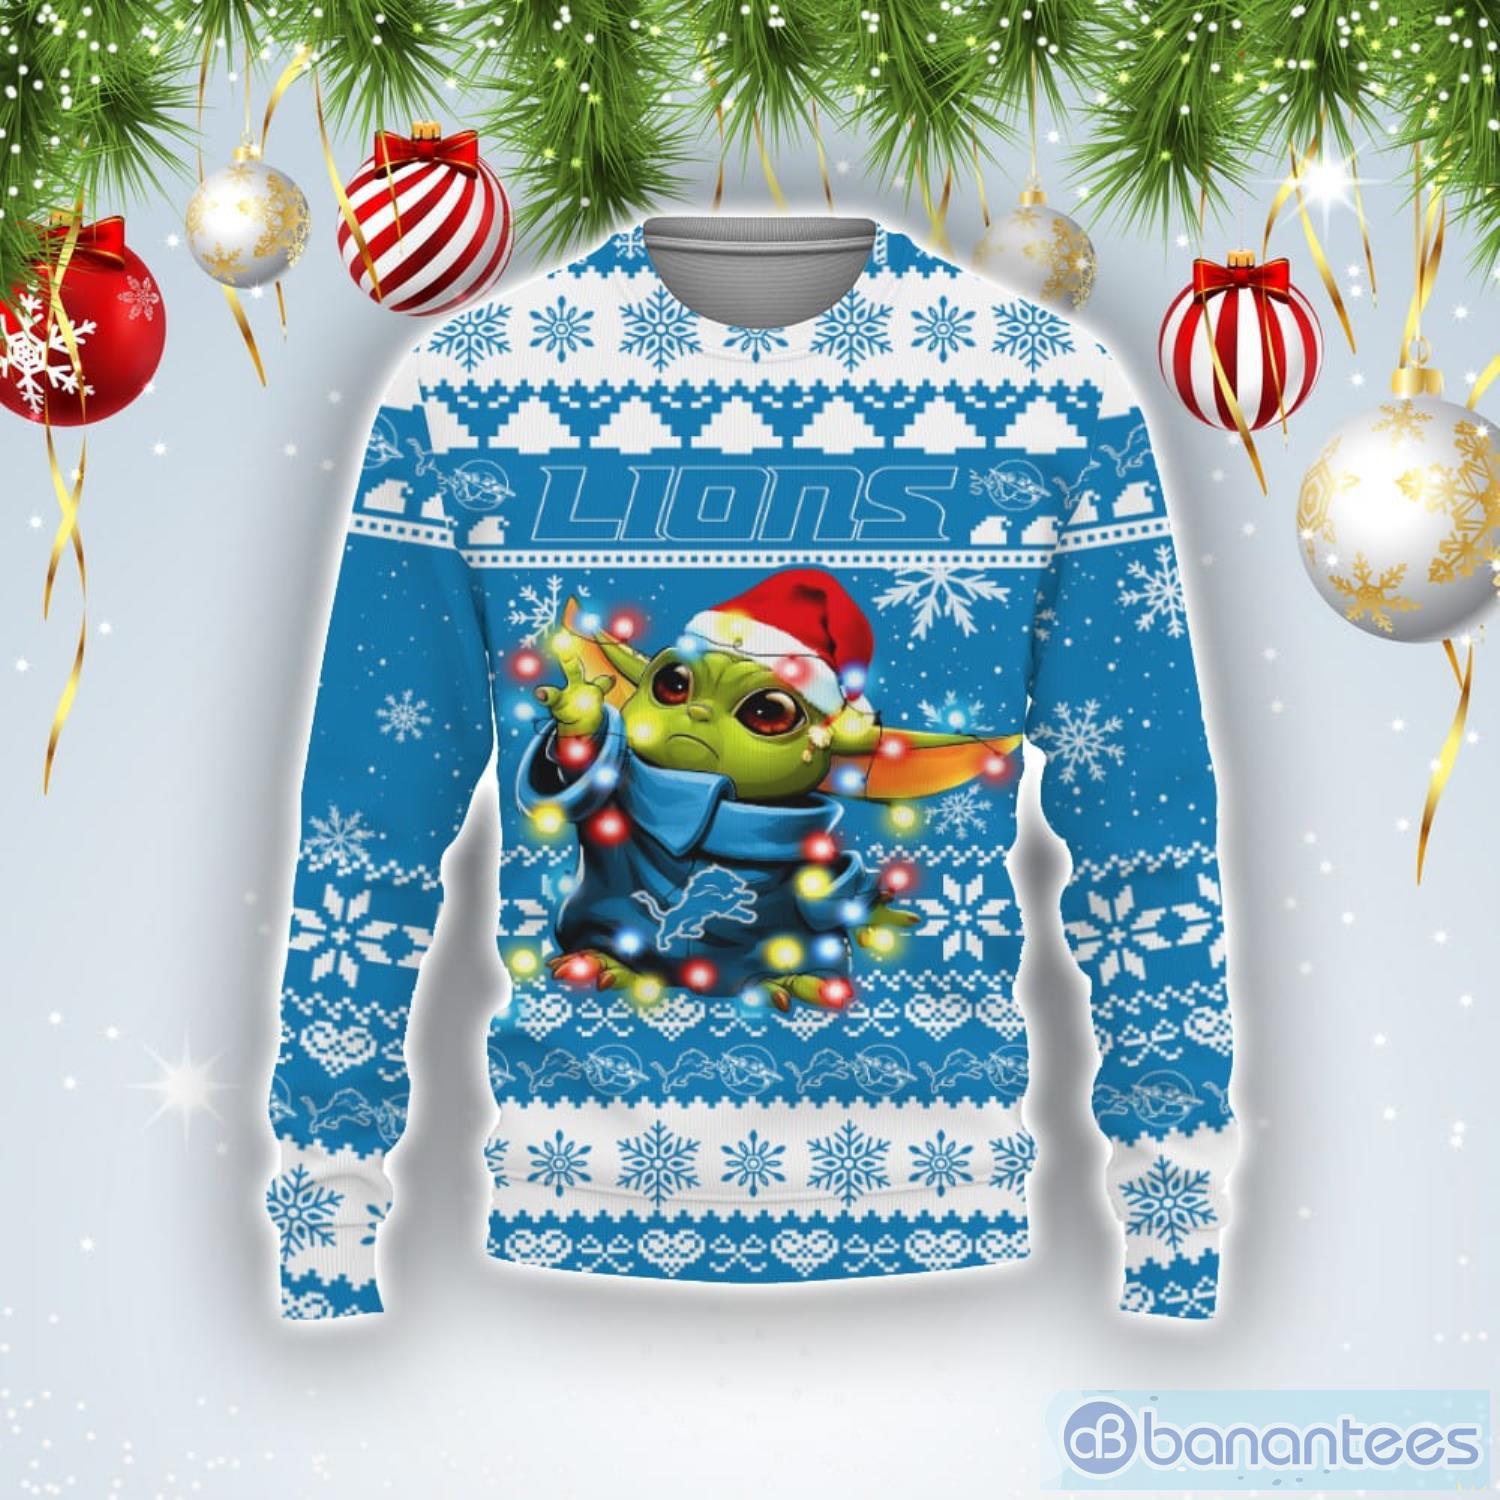 Detroit Lions Baby Yoda Star Wars Sports Football American Ugly Christmas Sweater Product Photo 1